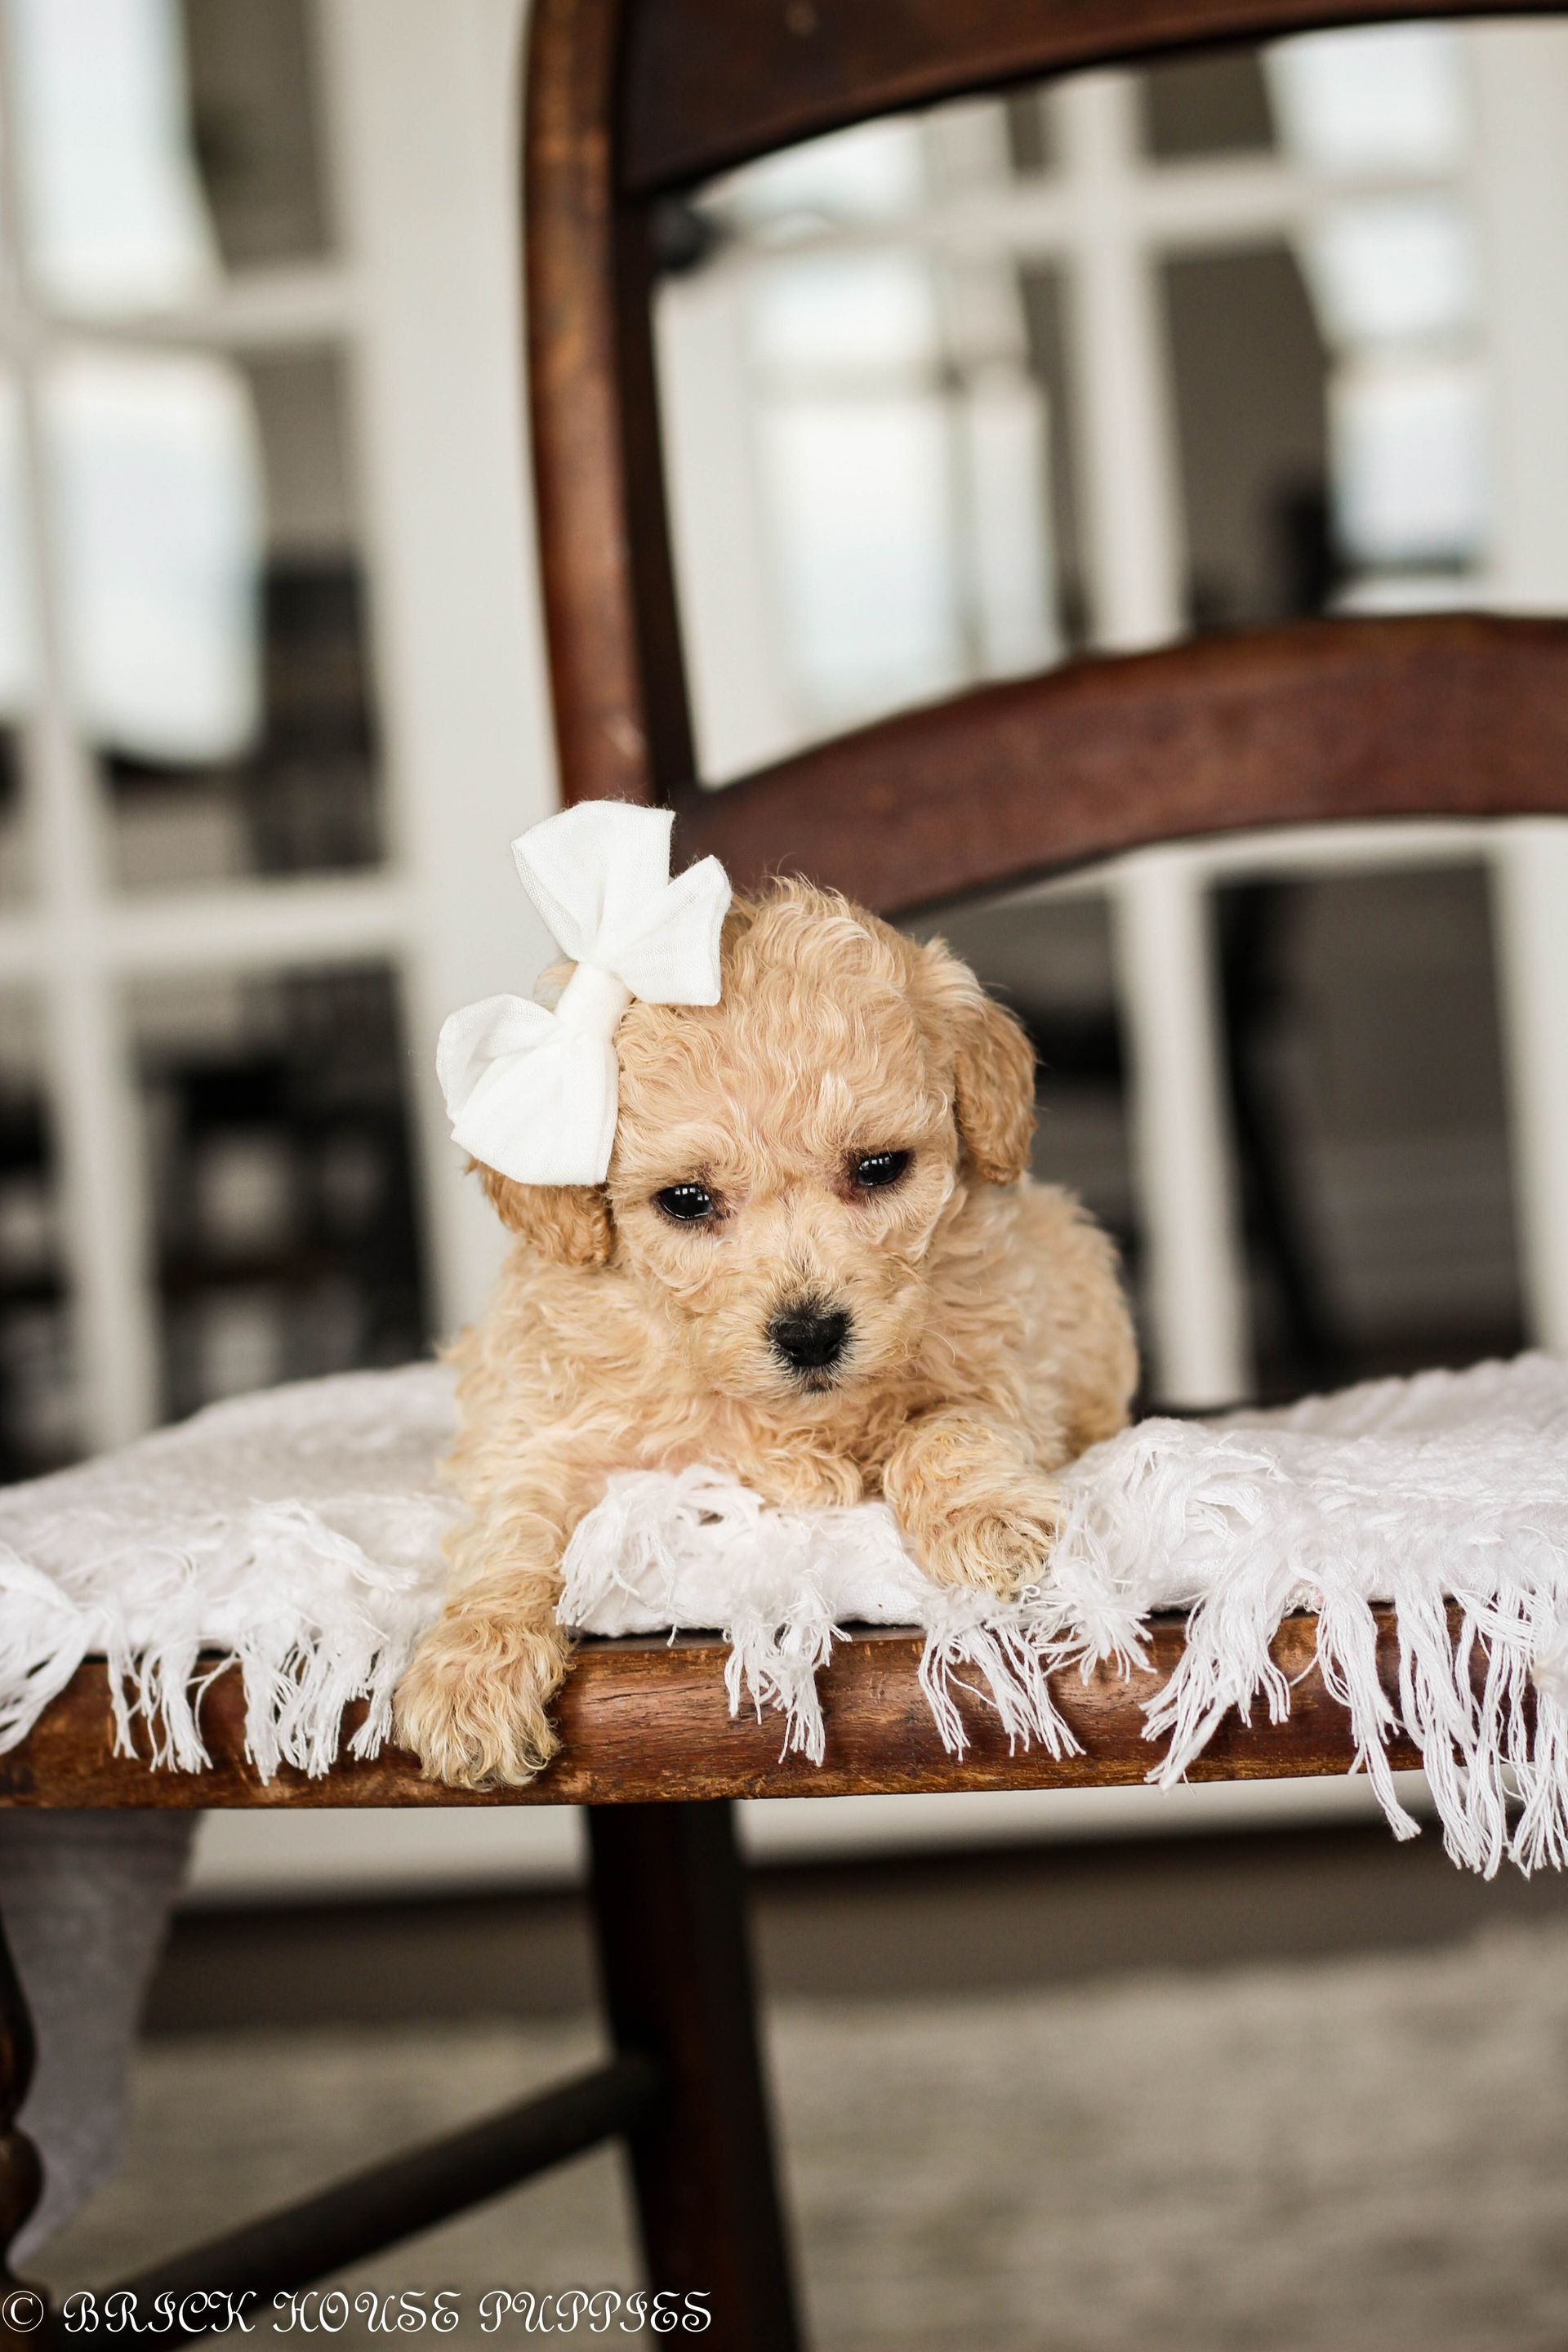 Poochon Puppies for sale, poochon puppies, bichpoo puppies, teddybear puppies for sale, teddybear puppies, teddybear puppy breeder, poochon breeder, puppies for sale